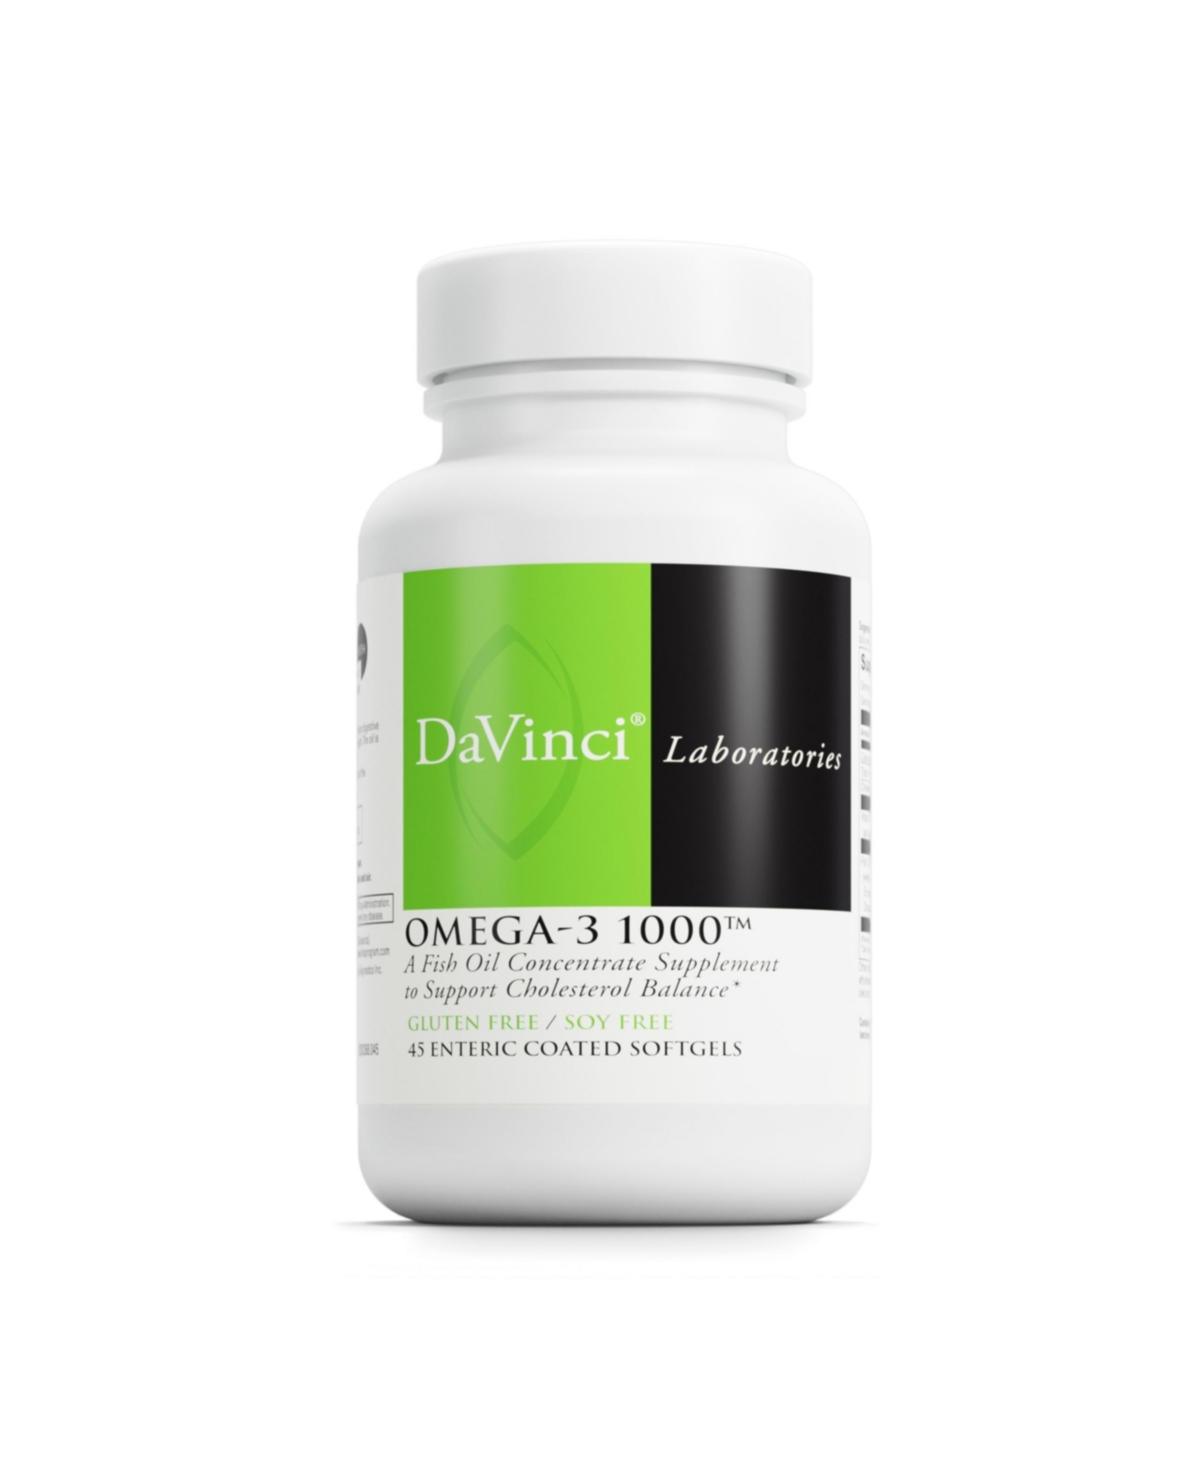 DaVinci Labs Omega-3 1000 - Dietary Supplement to Maintain Already Normal Cholesterol Levels and Support Immune System, Healthy Hair and Skin - Gluten